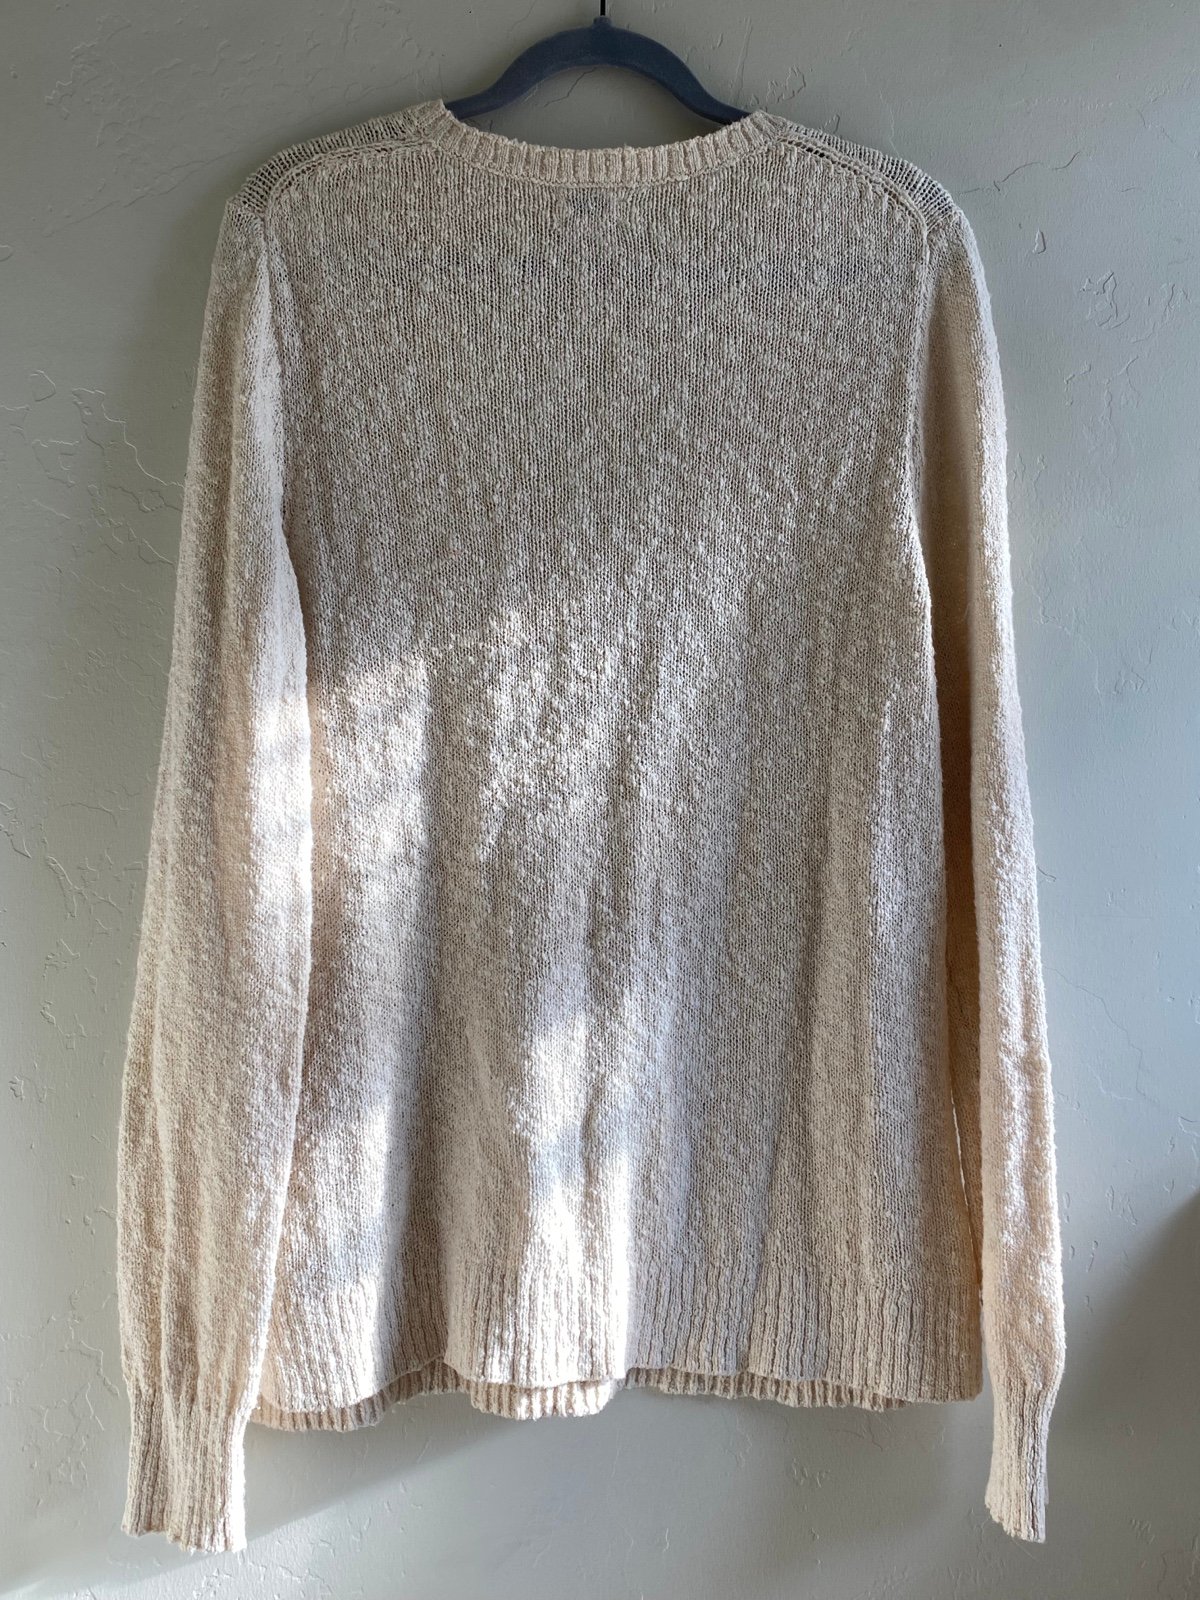 save up to 70% J Crew Knit Sweater oTZQG7PNn New Style